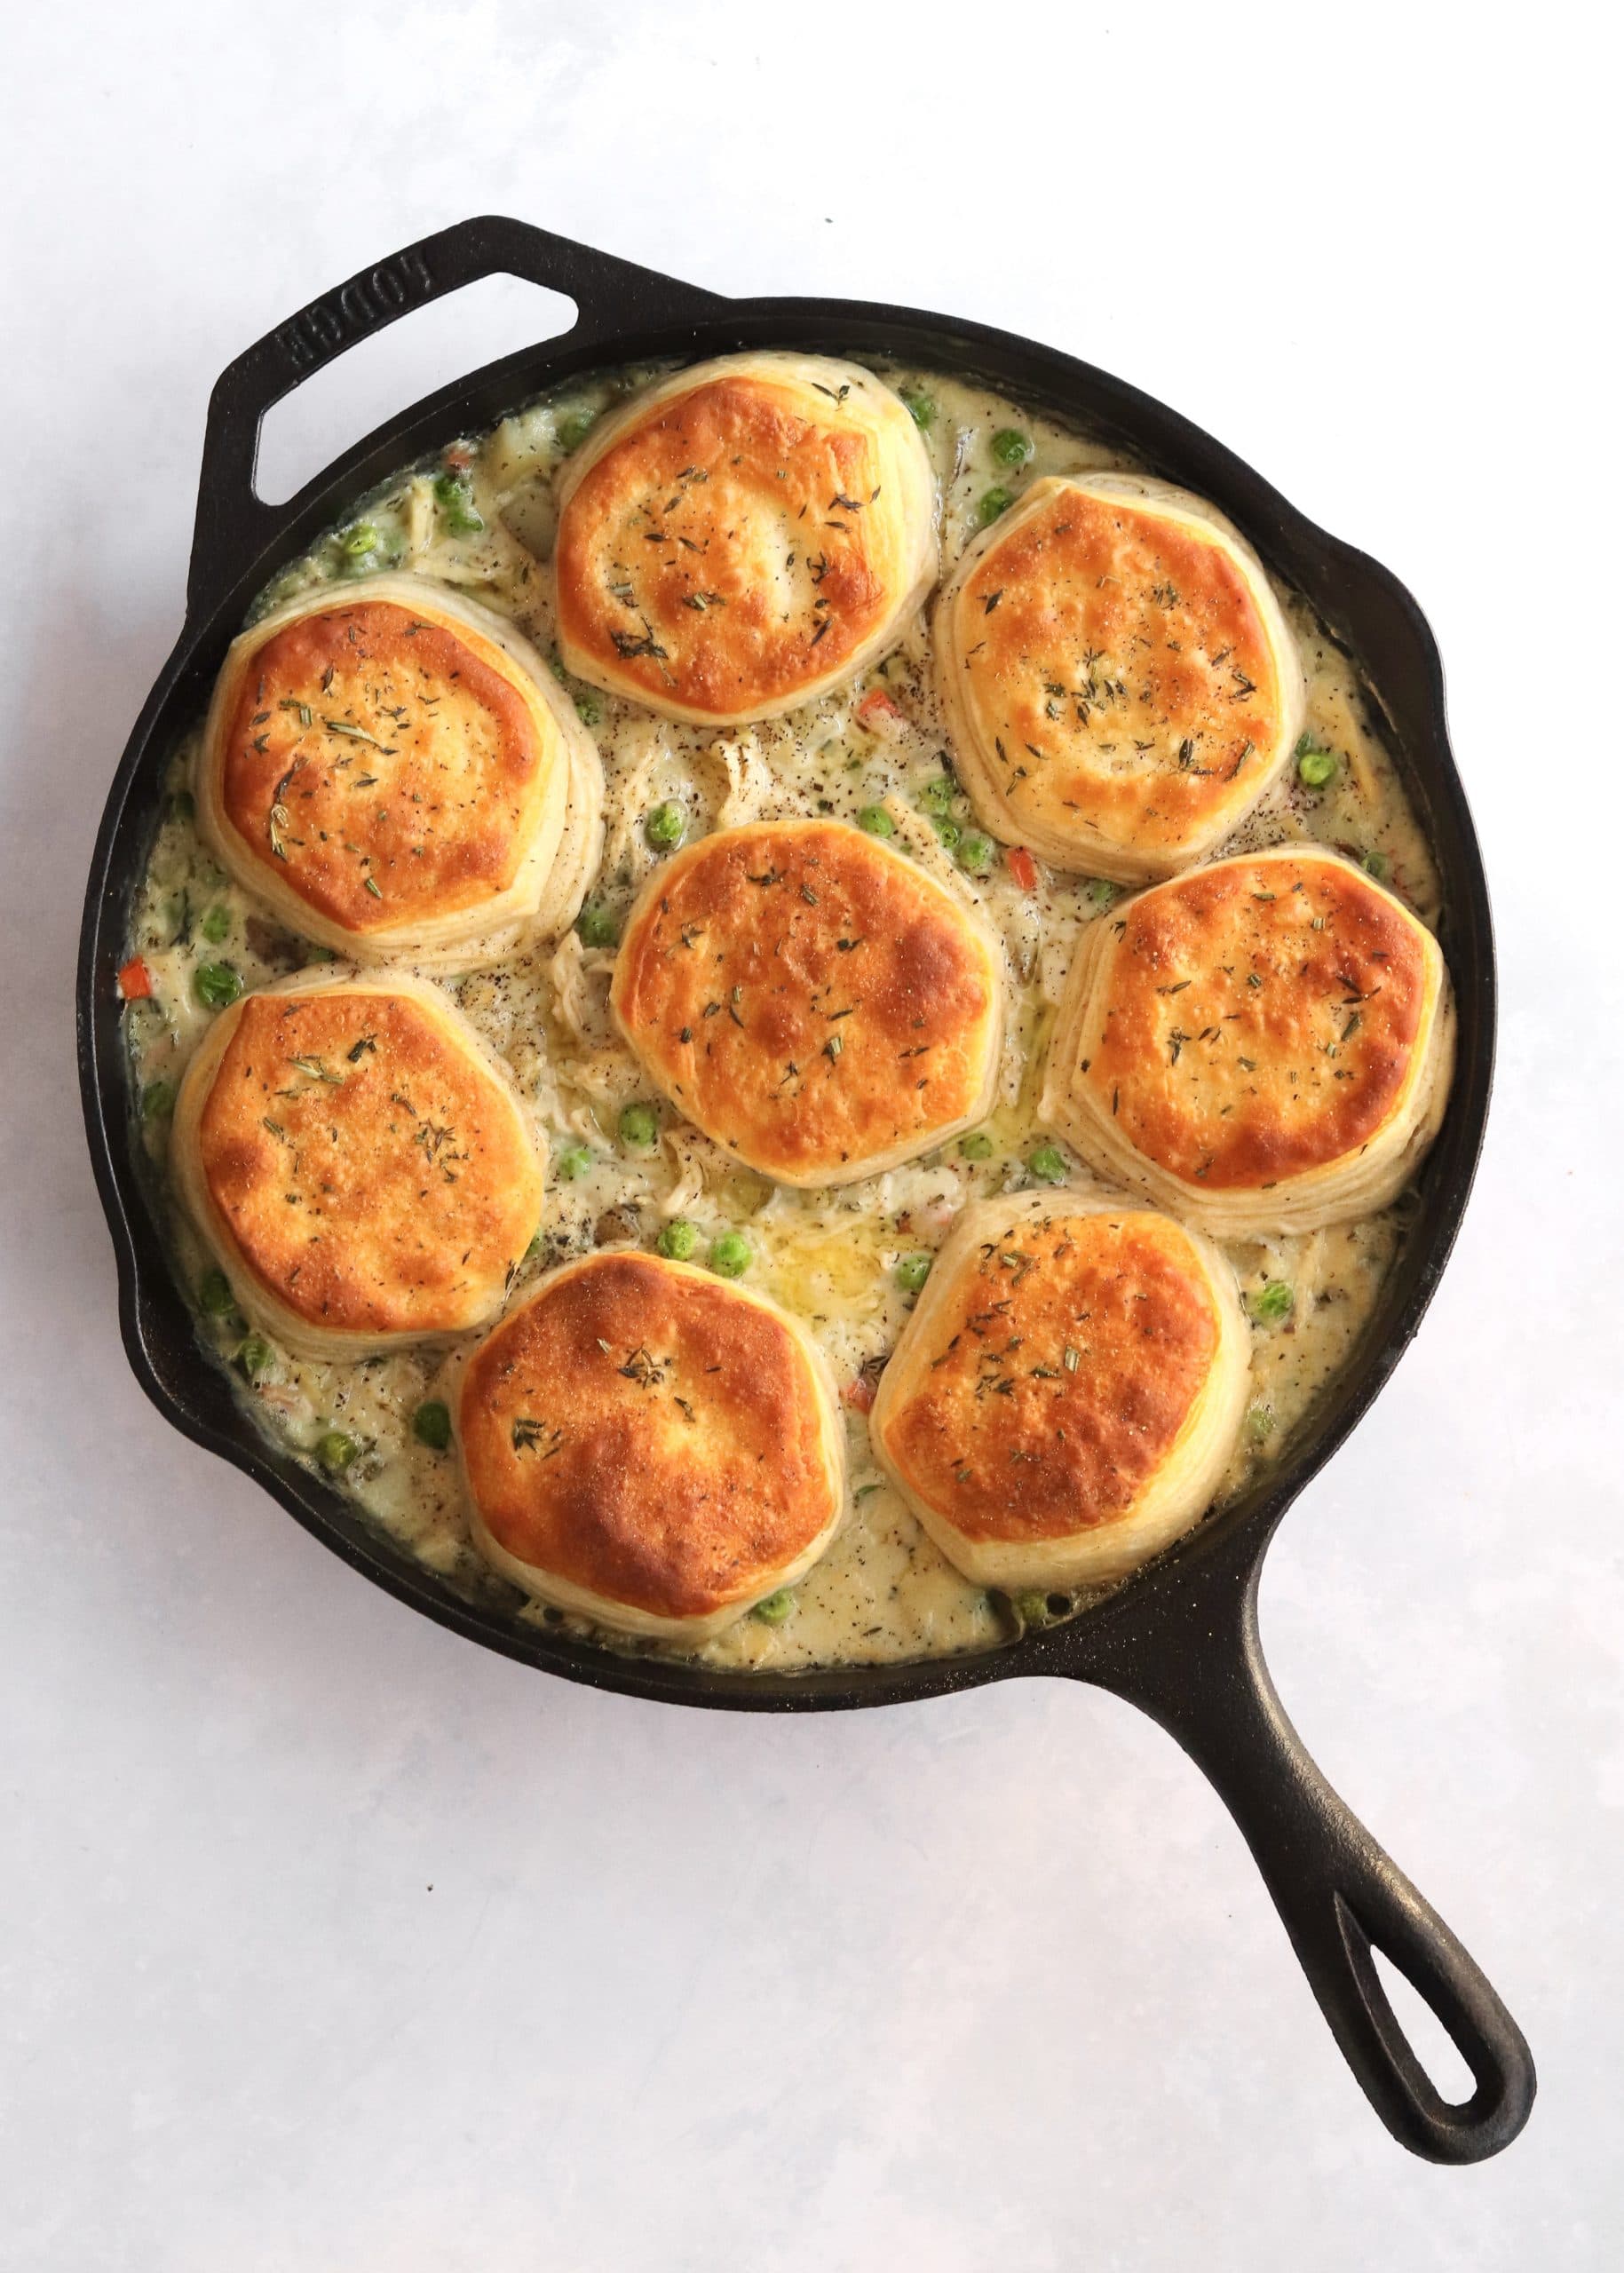 Baked turkey pot pie with biscuits